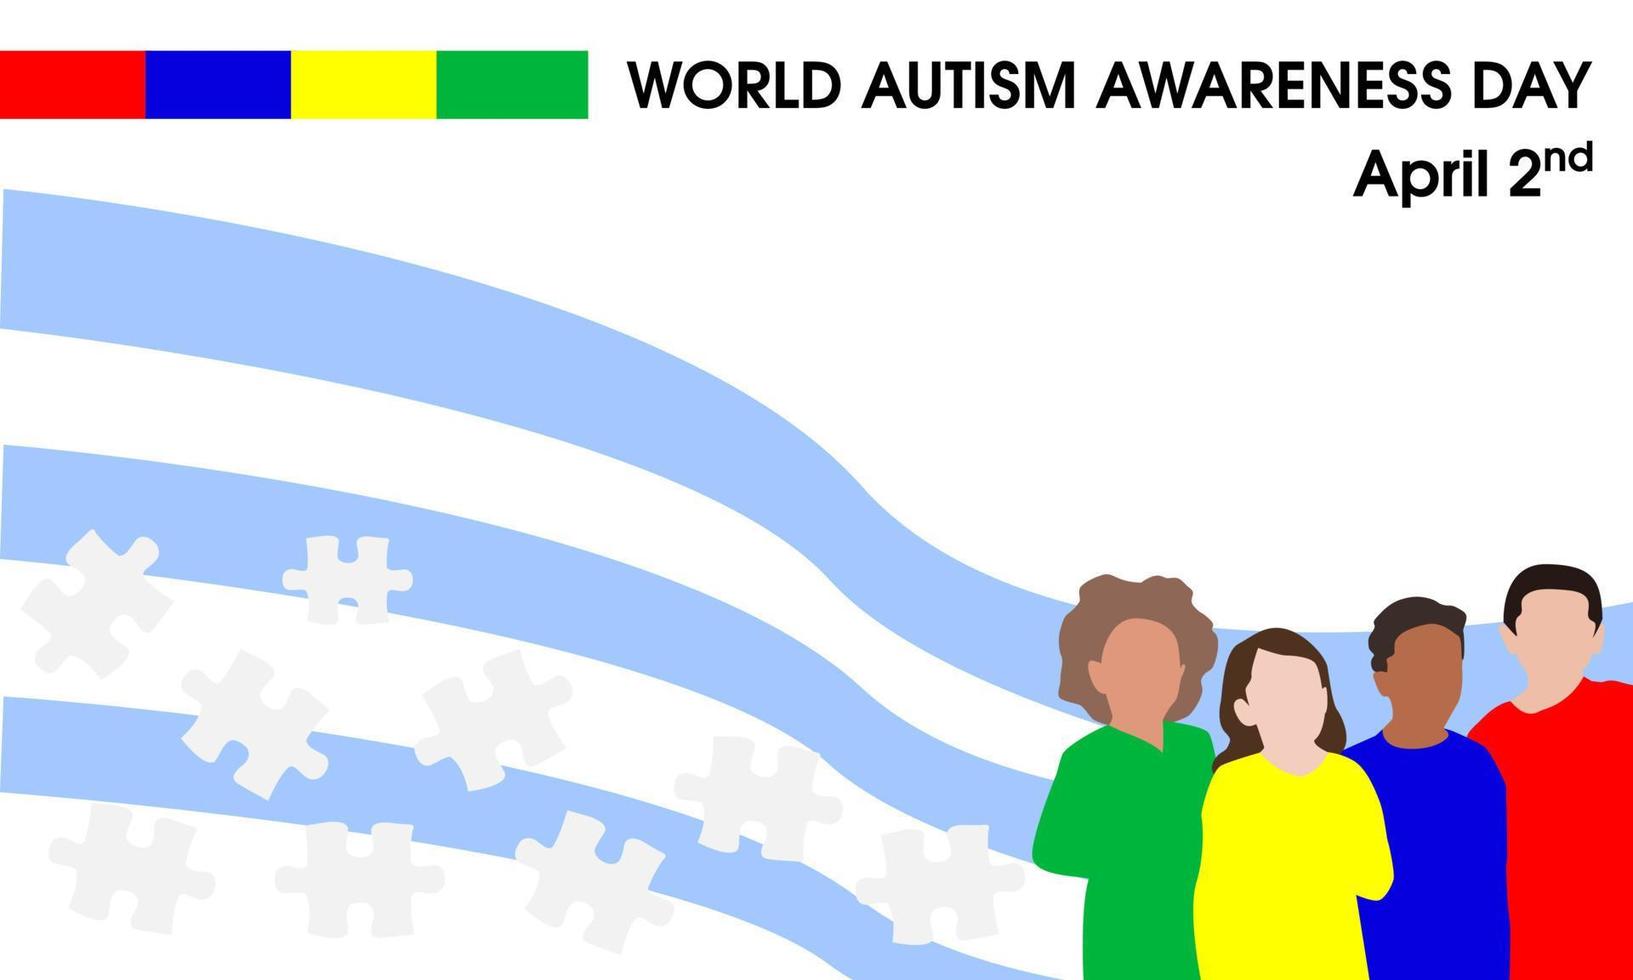 World autism awareness day poster. vector